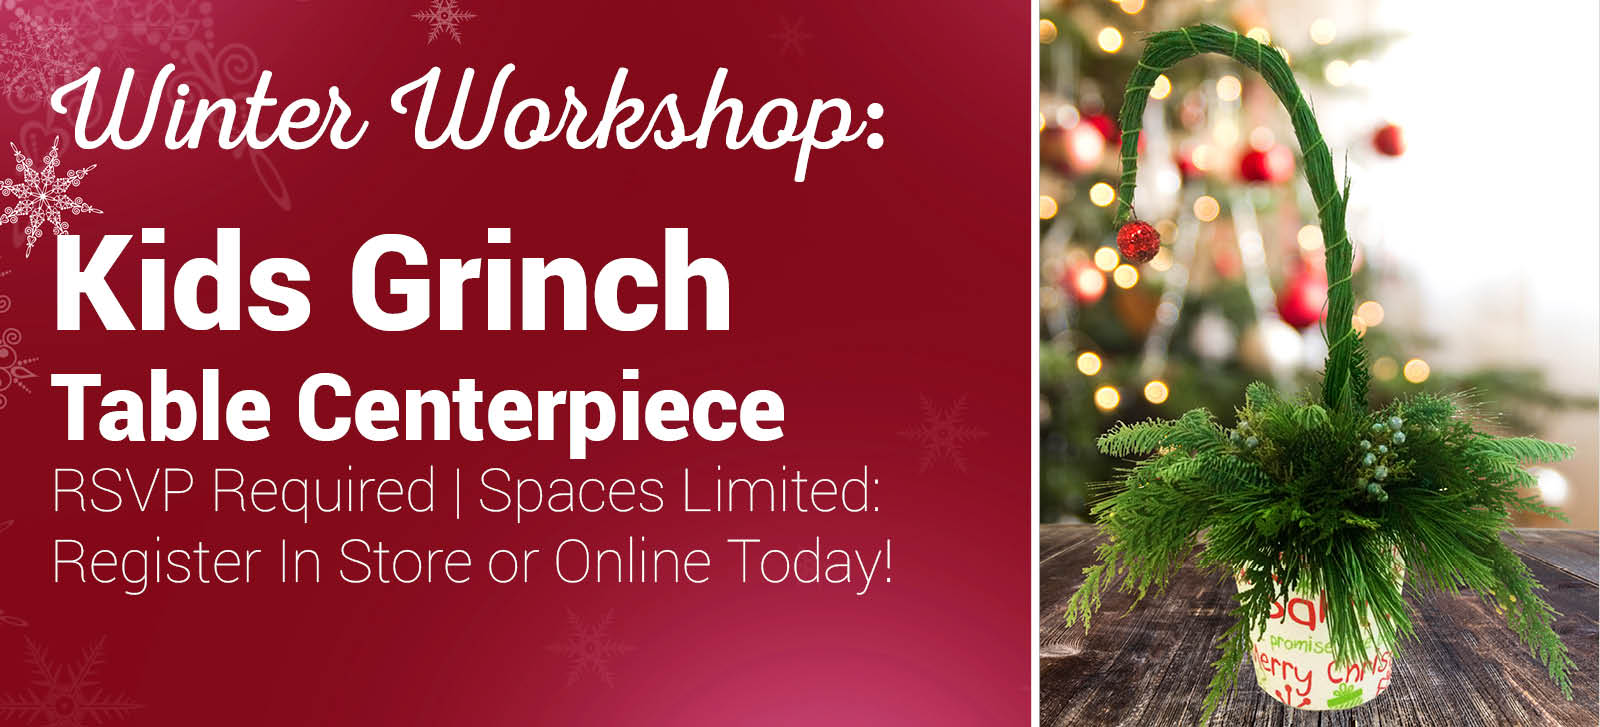 Let the kids create a Grinch inspired table centerpiece during our Make & Take Winter Workshop!